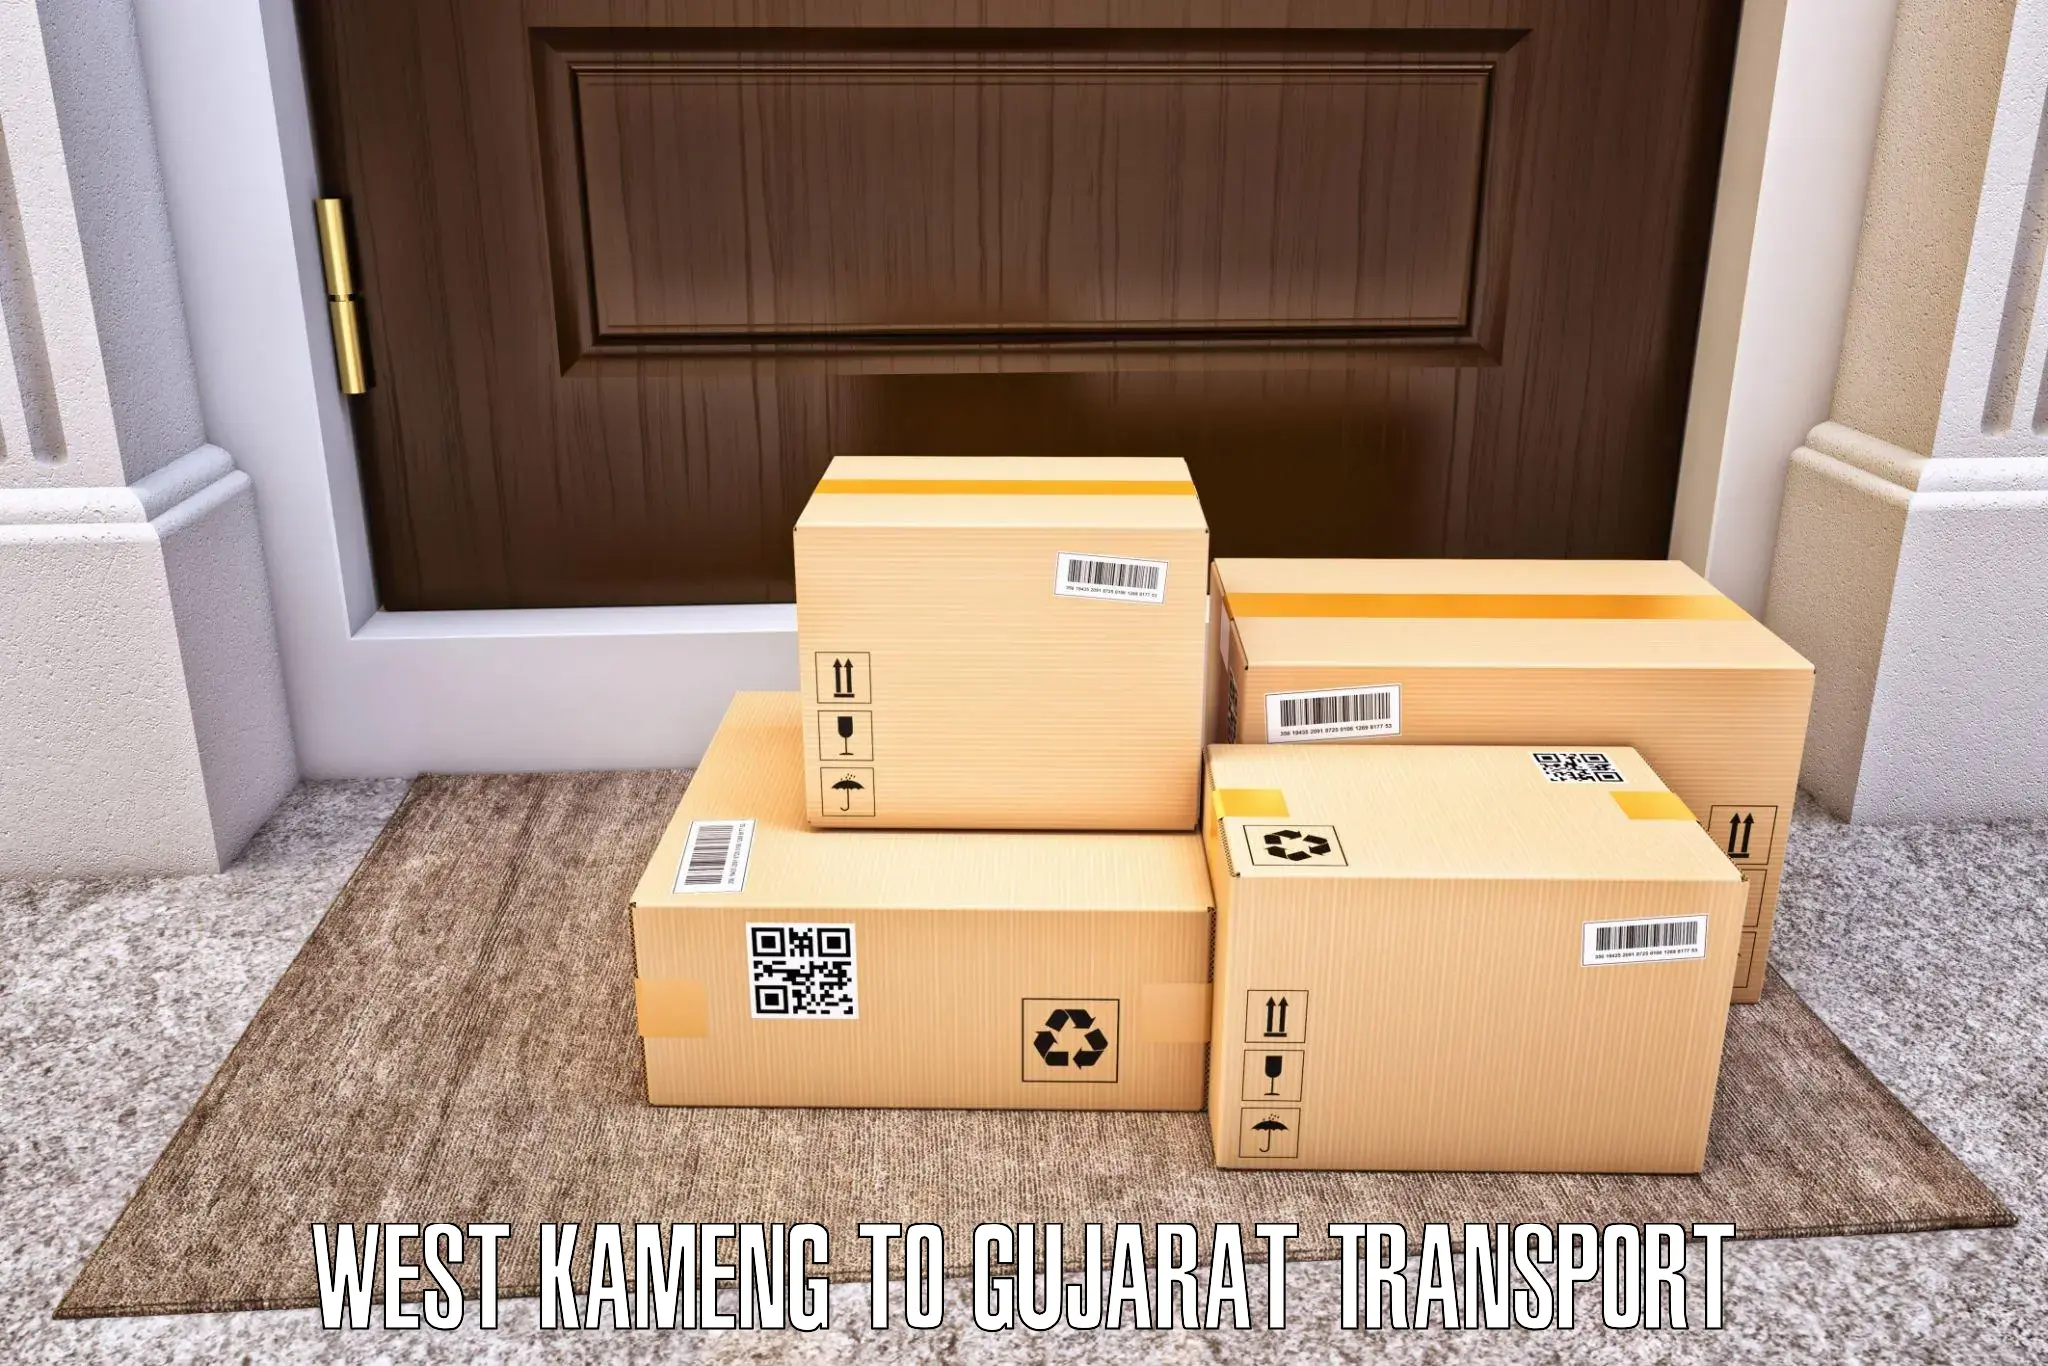 Commercial transport service West Kameng to Talaja